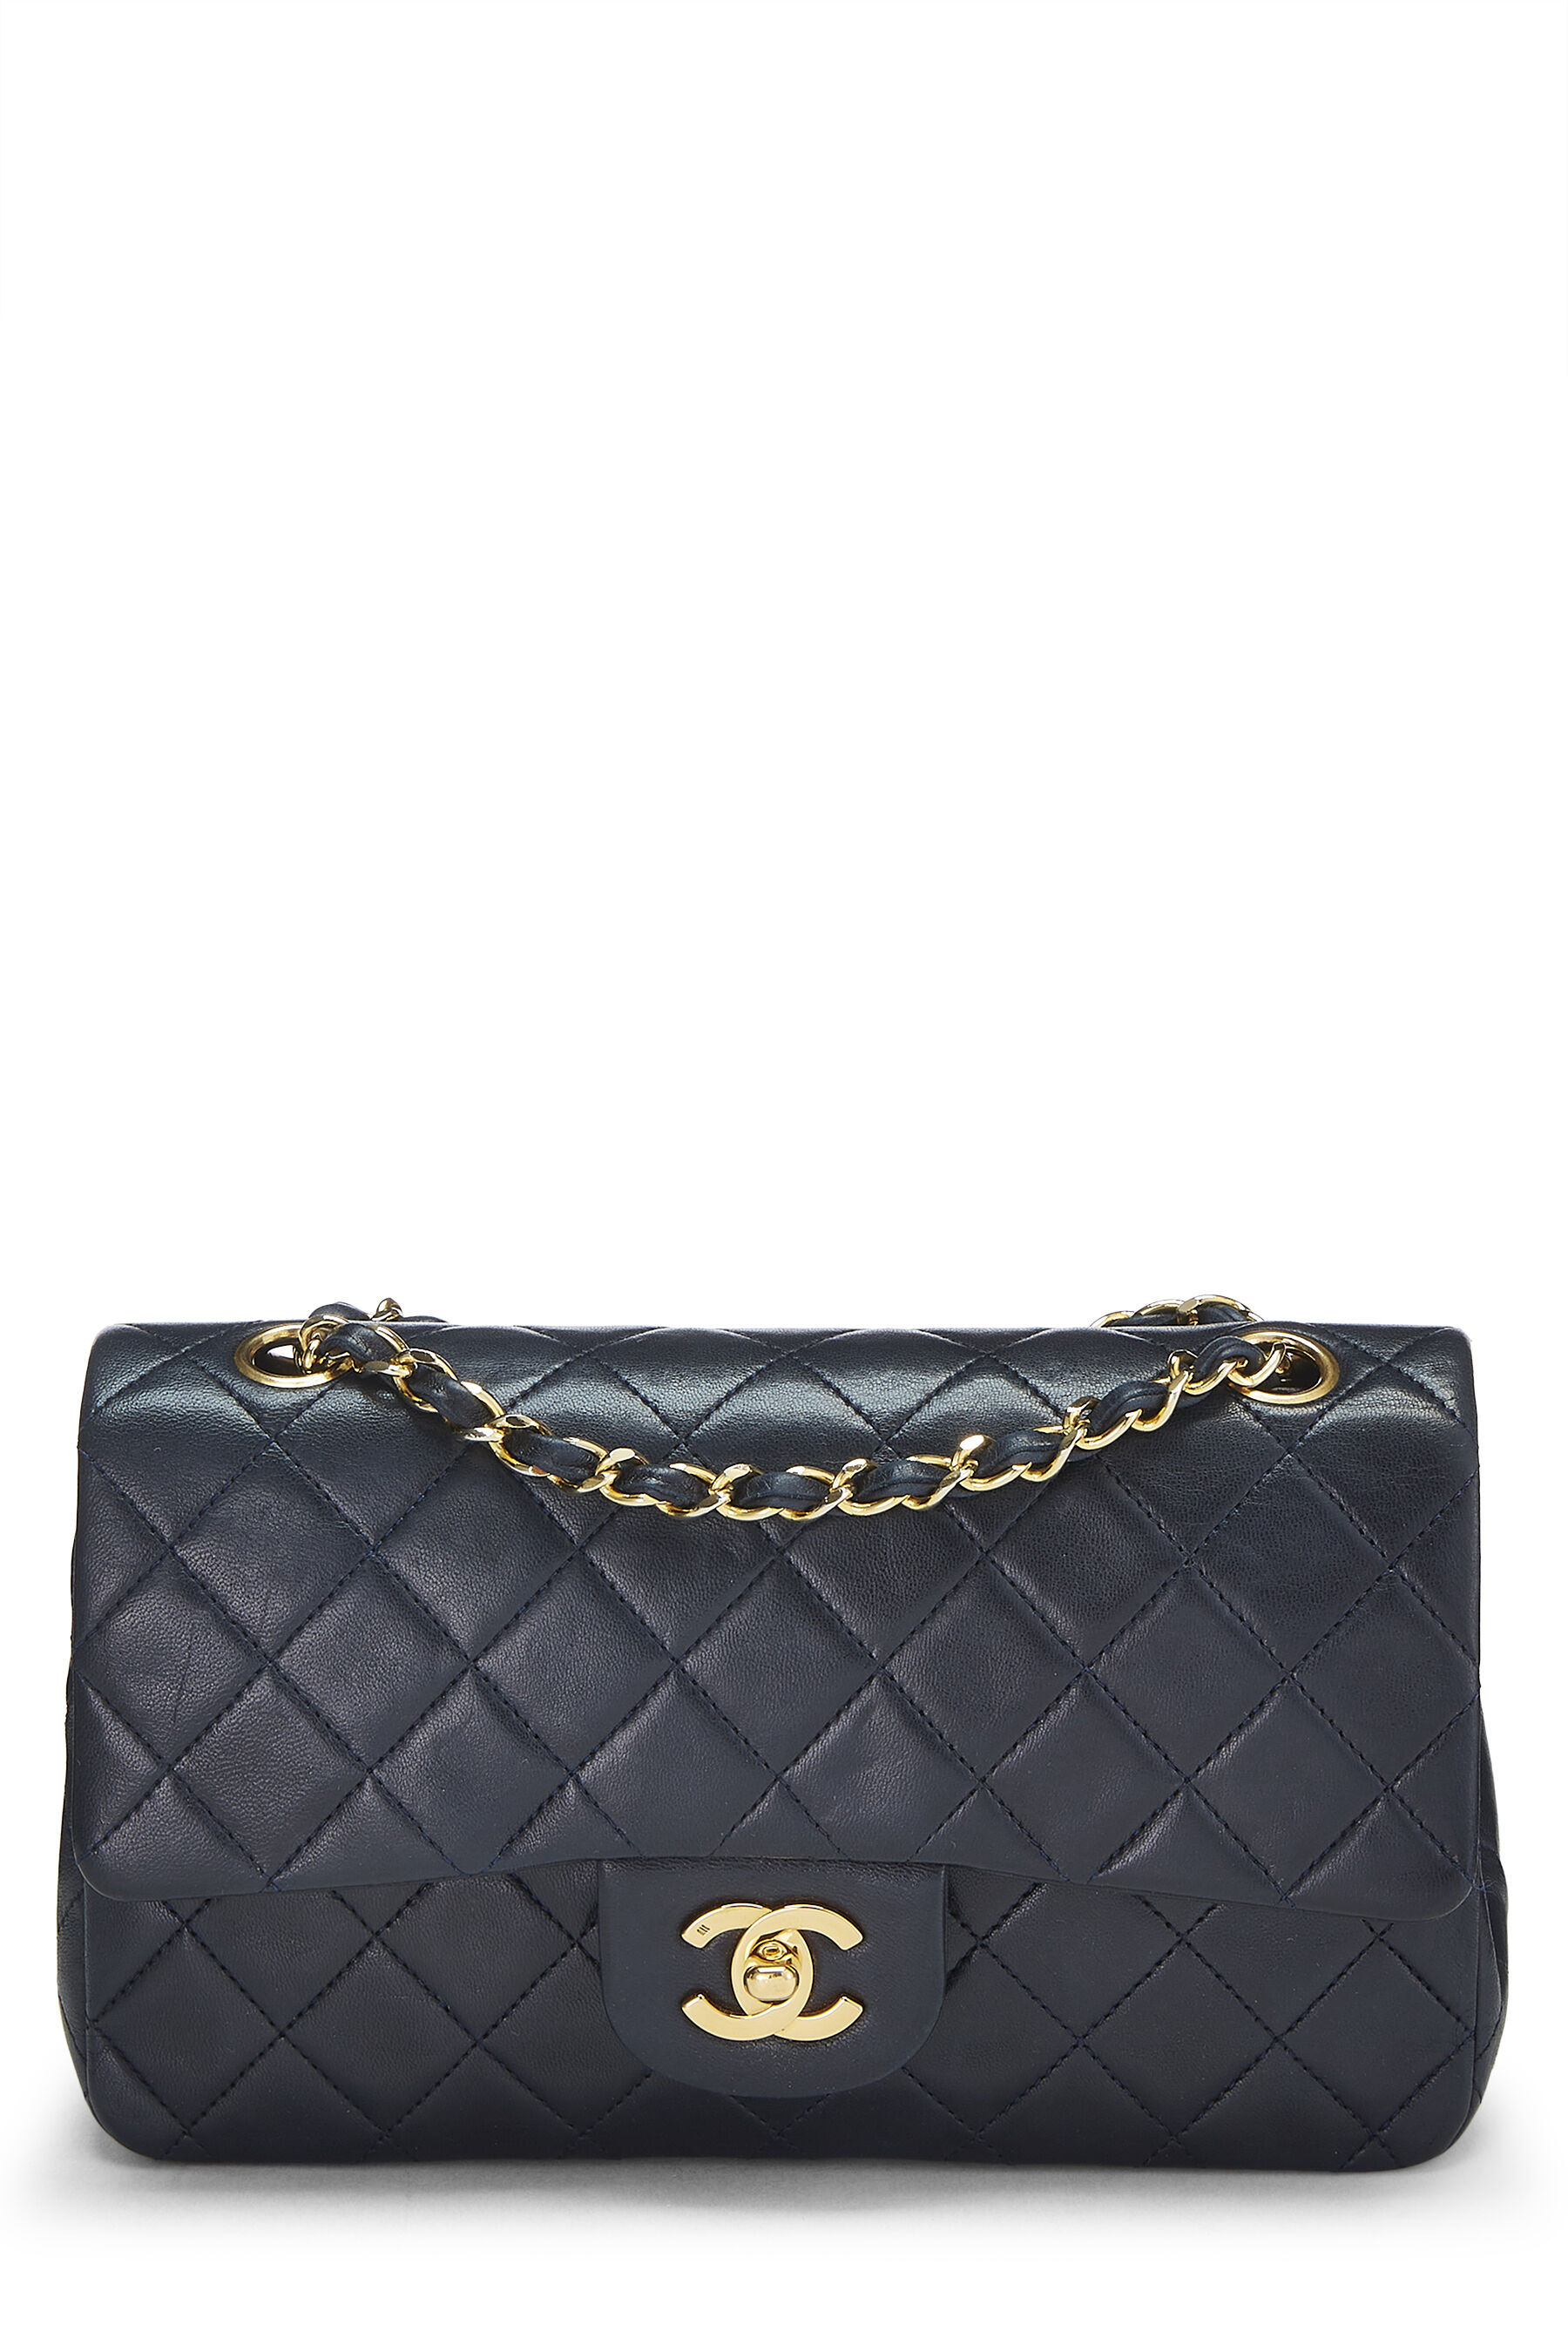 Chanel Navy Quilted Lambskin Classic Double Flap Small Q6B0101IN1048  WGACA